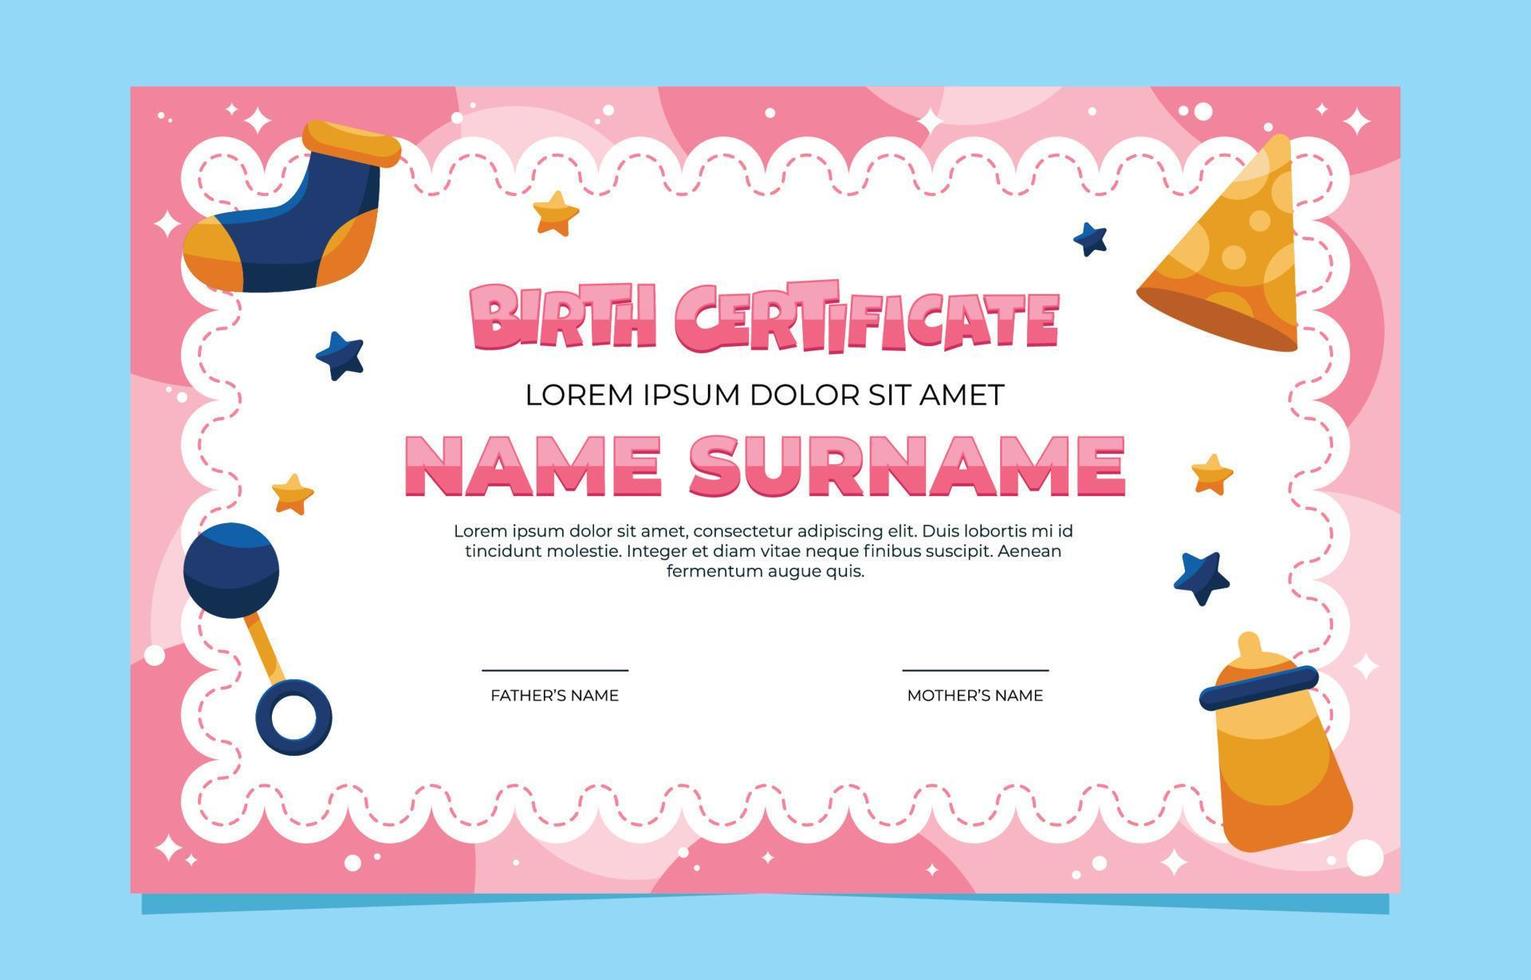 Born Day Certificate Template vector